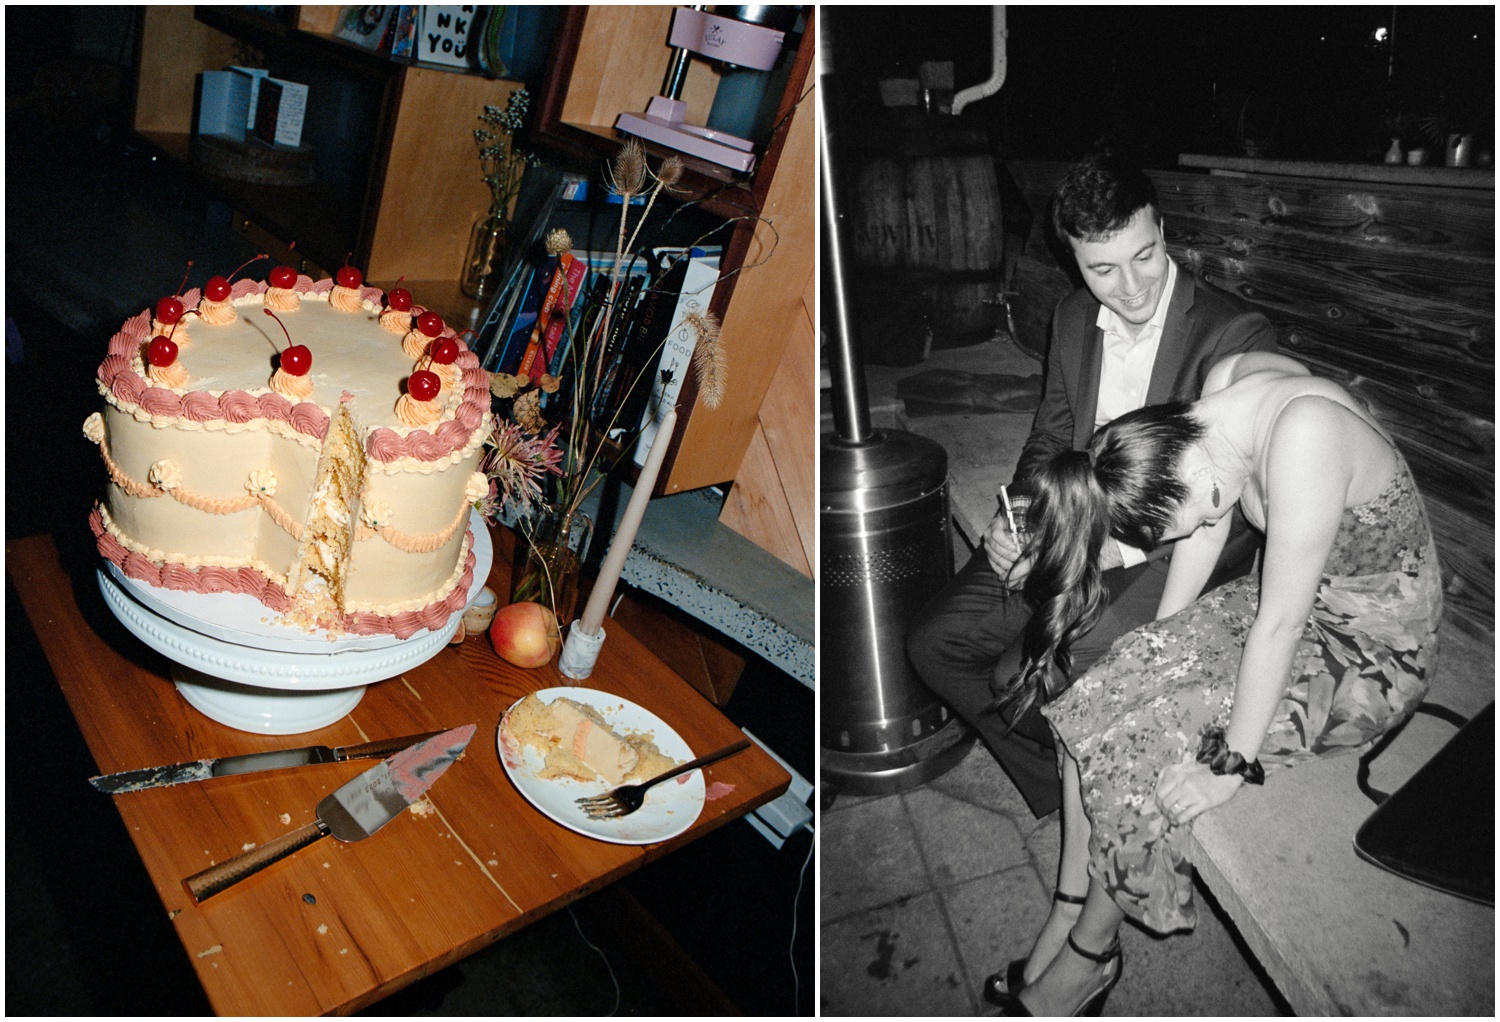 Left: a heart shaped wedding cake after the couple has cut it. Right: a couple takes a break from the dance floor.